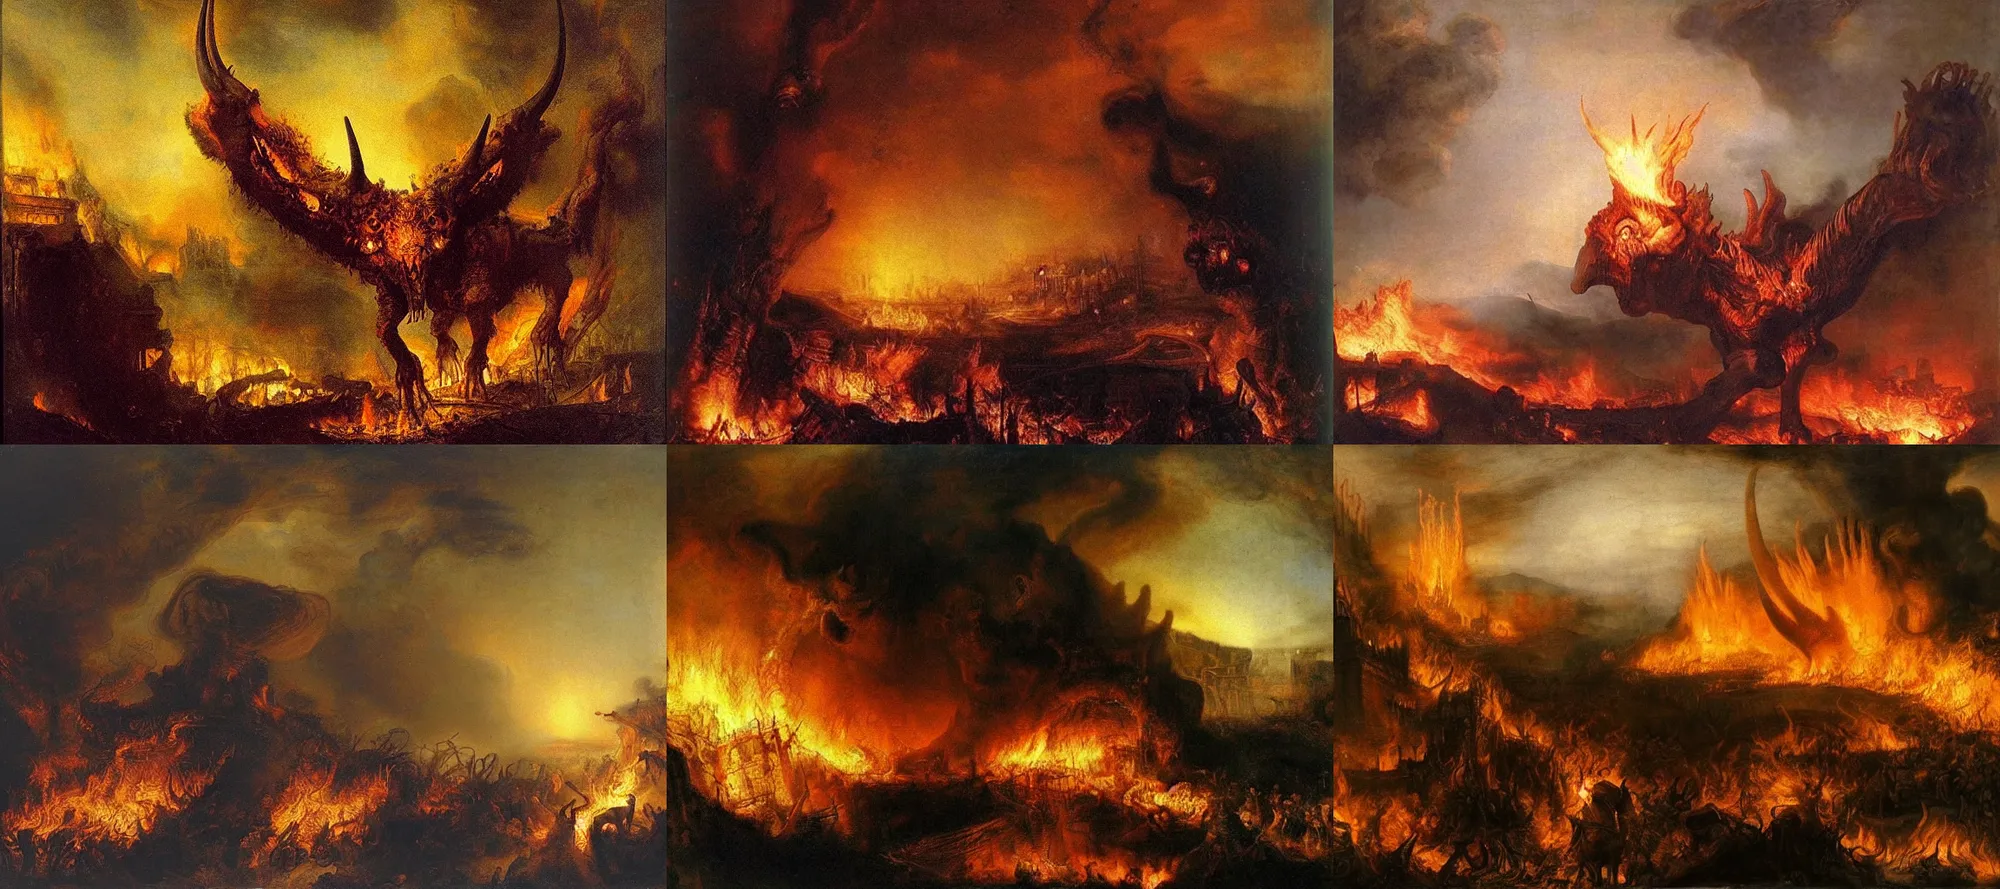 Prompt: A colossal primordial monster, Large curved horns. Four legs. two arms. It stands tall over the burning ruins of an ancient city on fire. The city is under siege. Death is all around. The Apocalypse. The sky is on fire. Oil painting by Rembrandt.